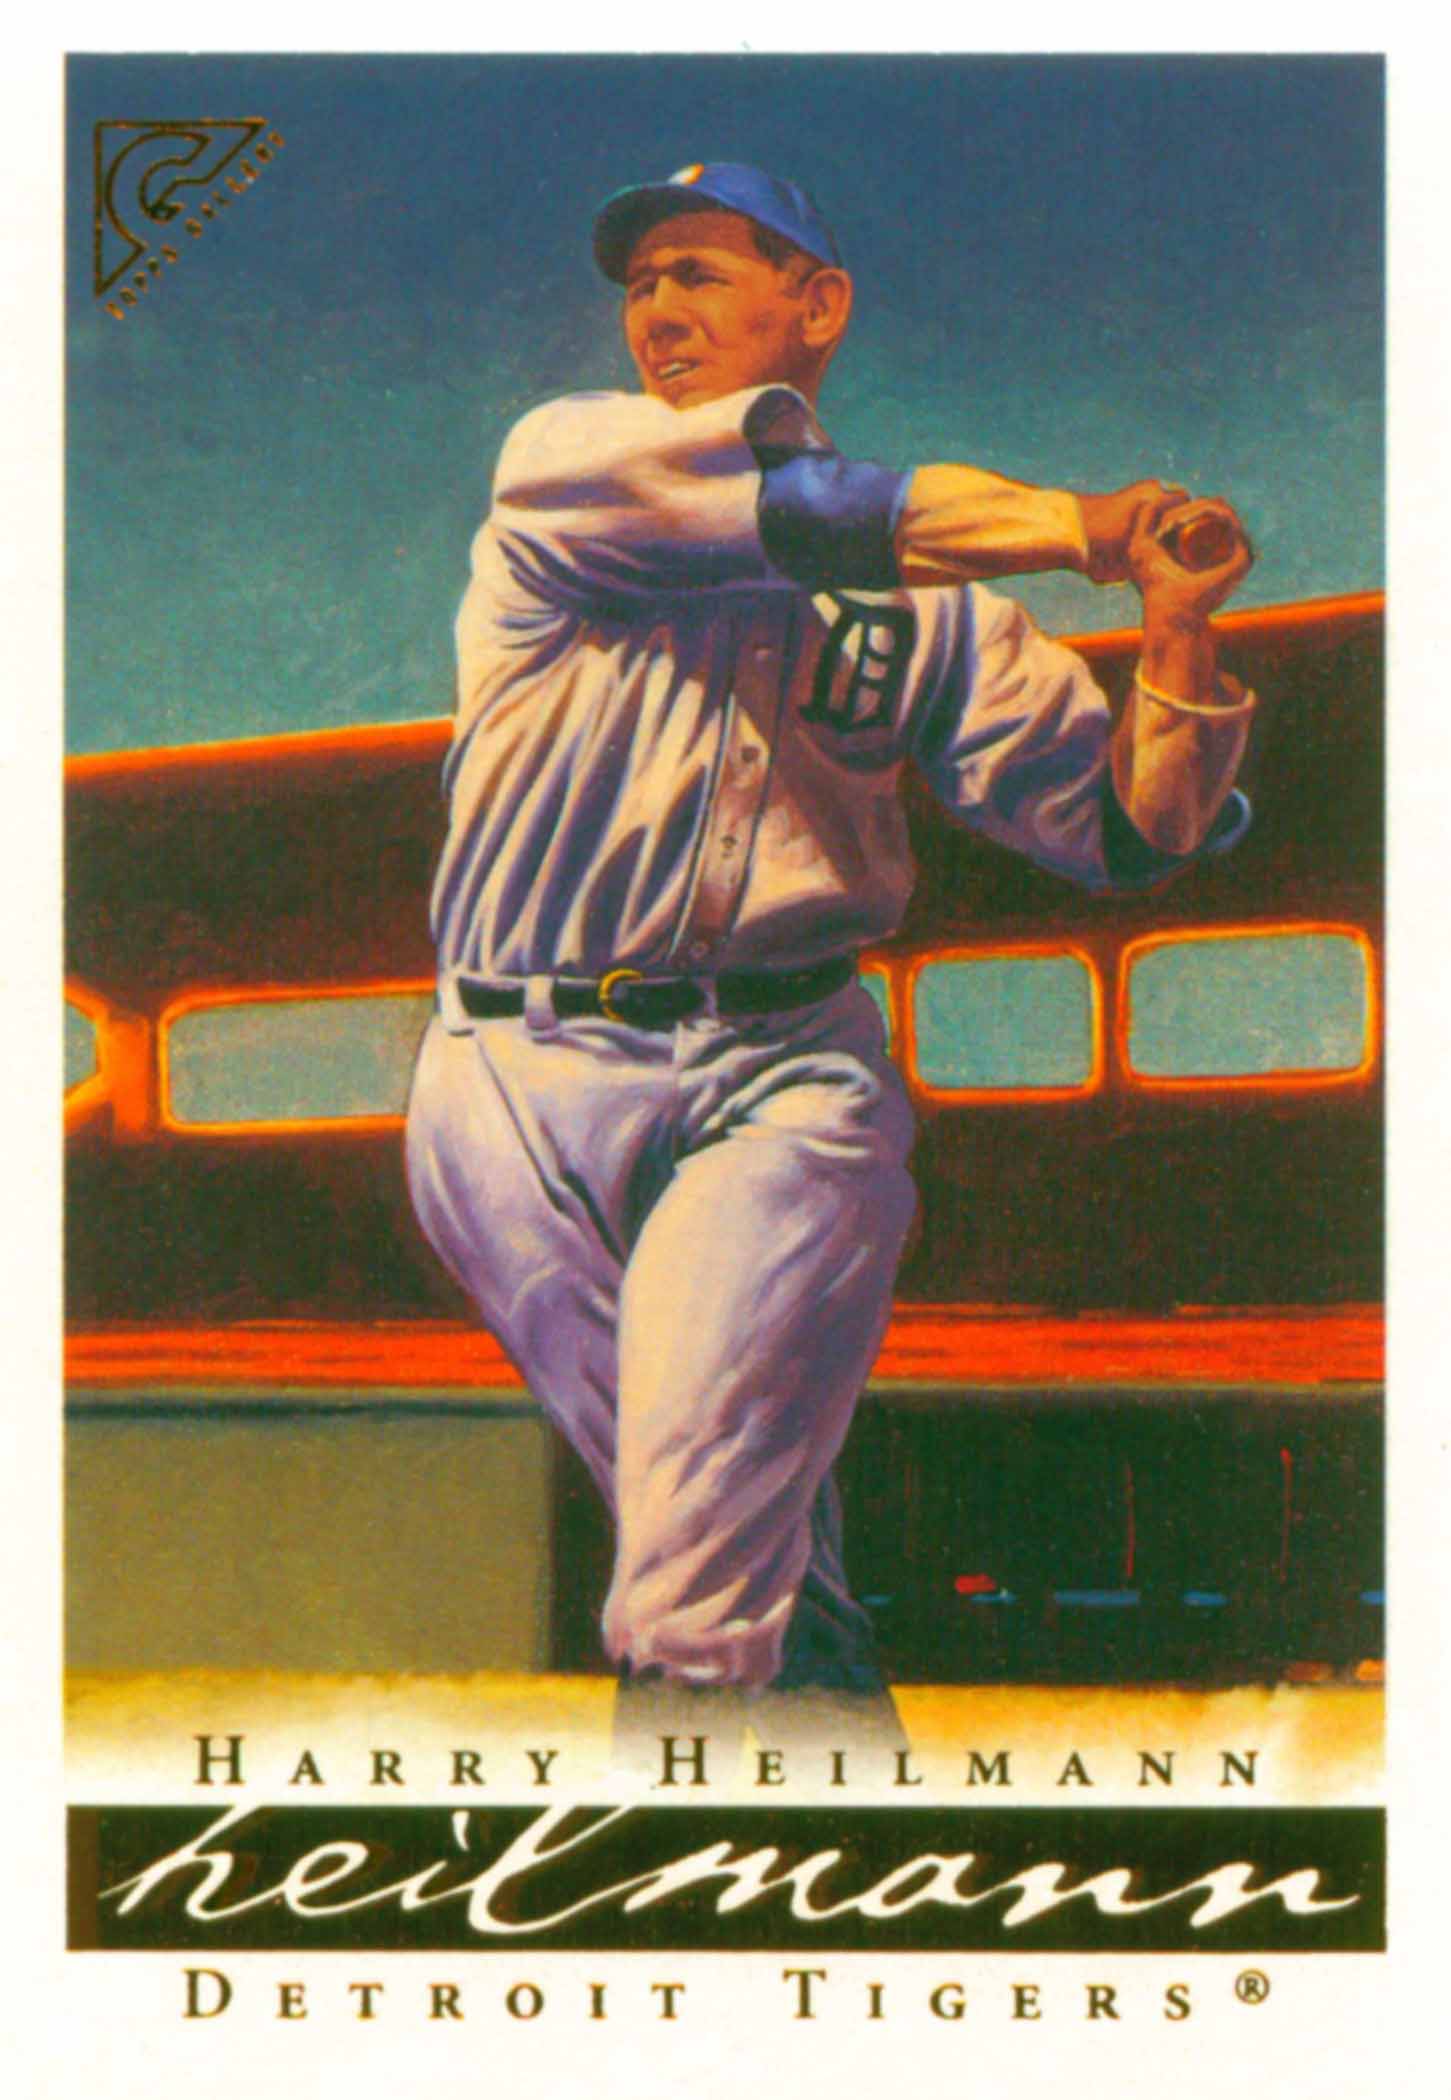 2003 Topps Gallery Hall of Fame